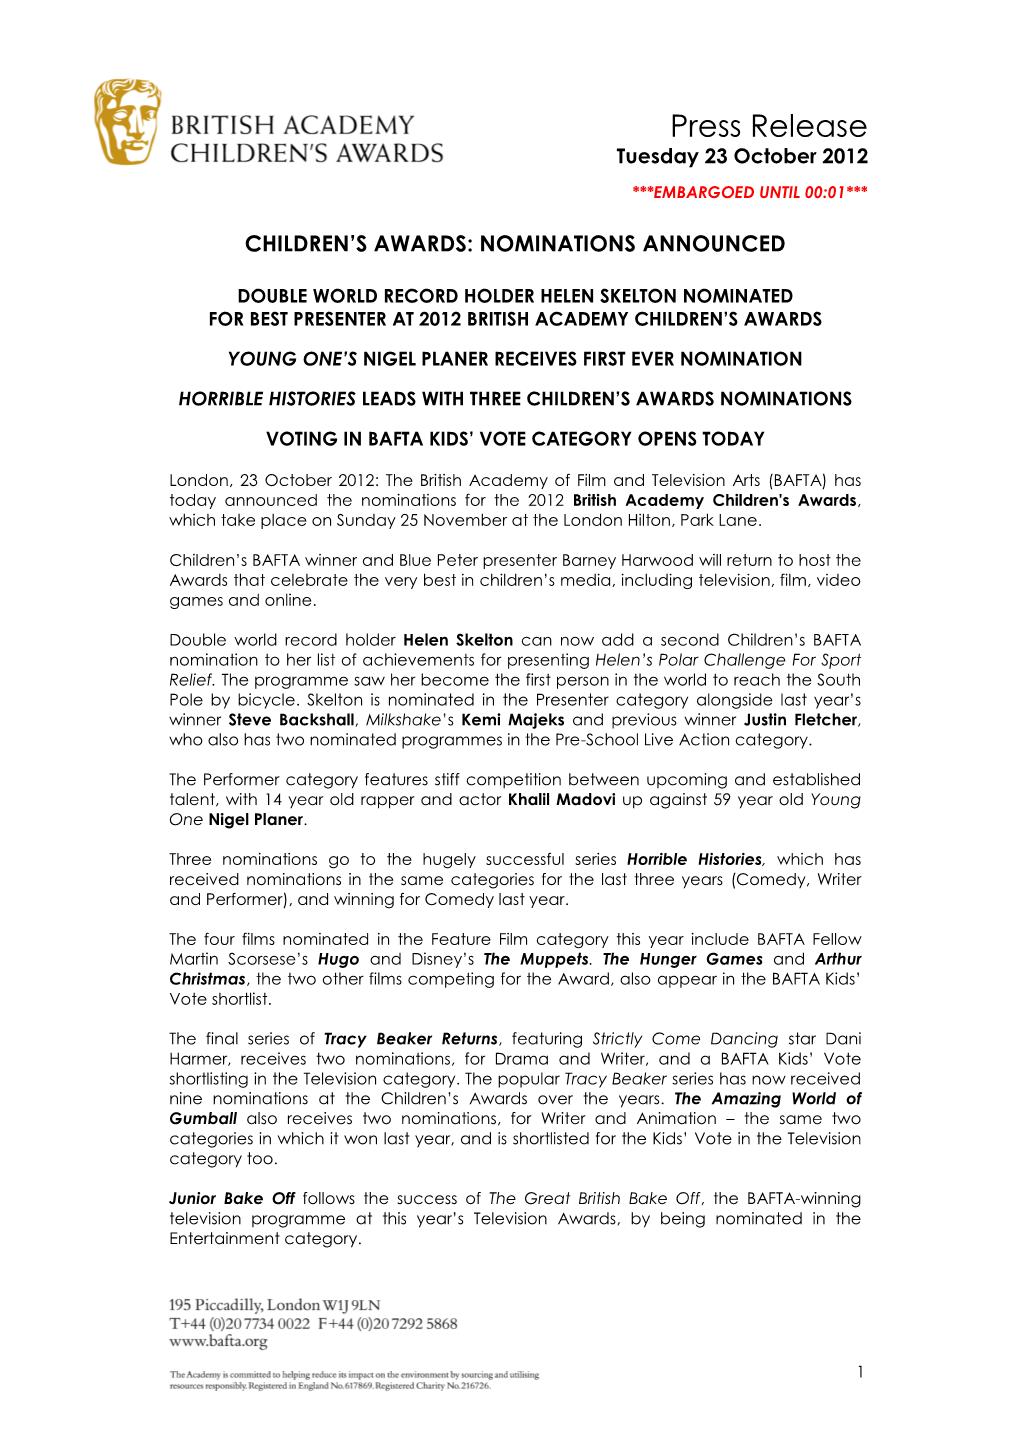 Press Release Tuesday 23 October 2012